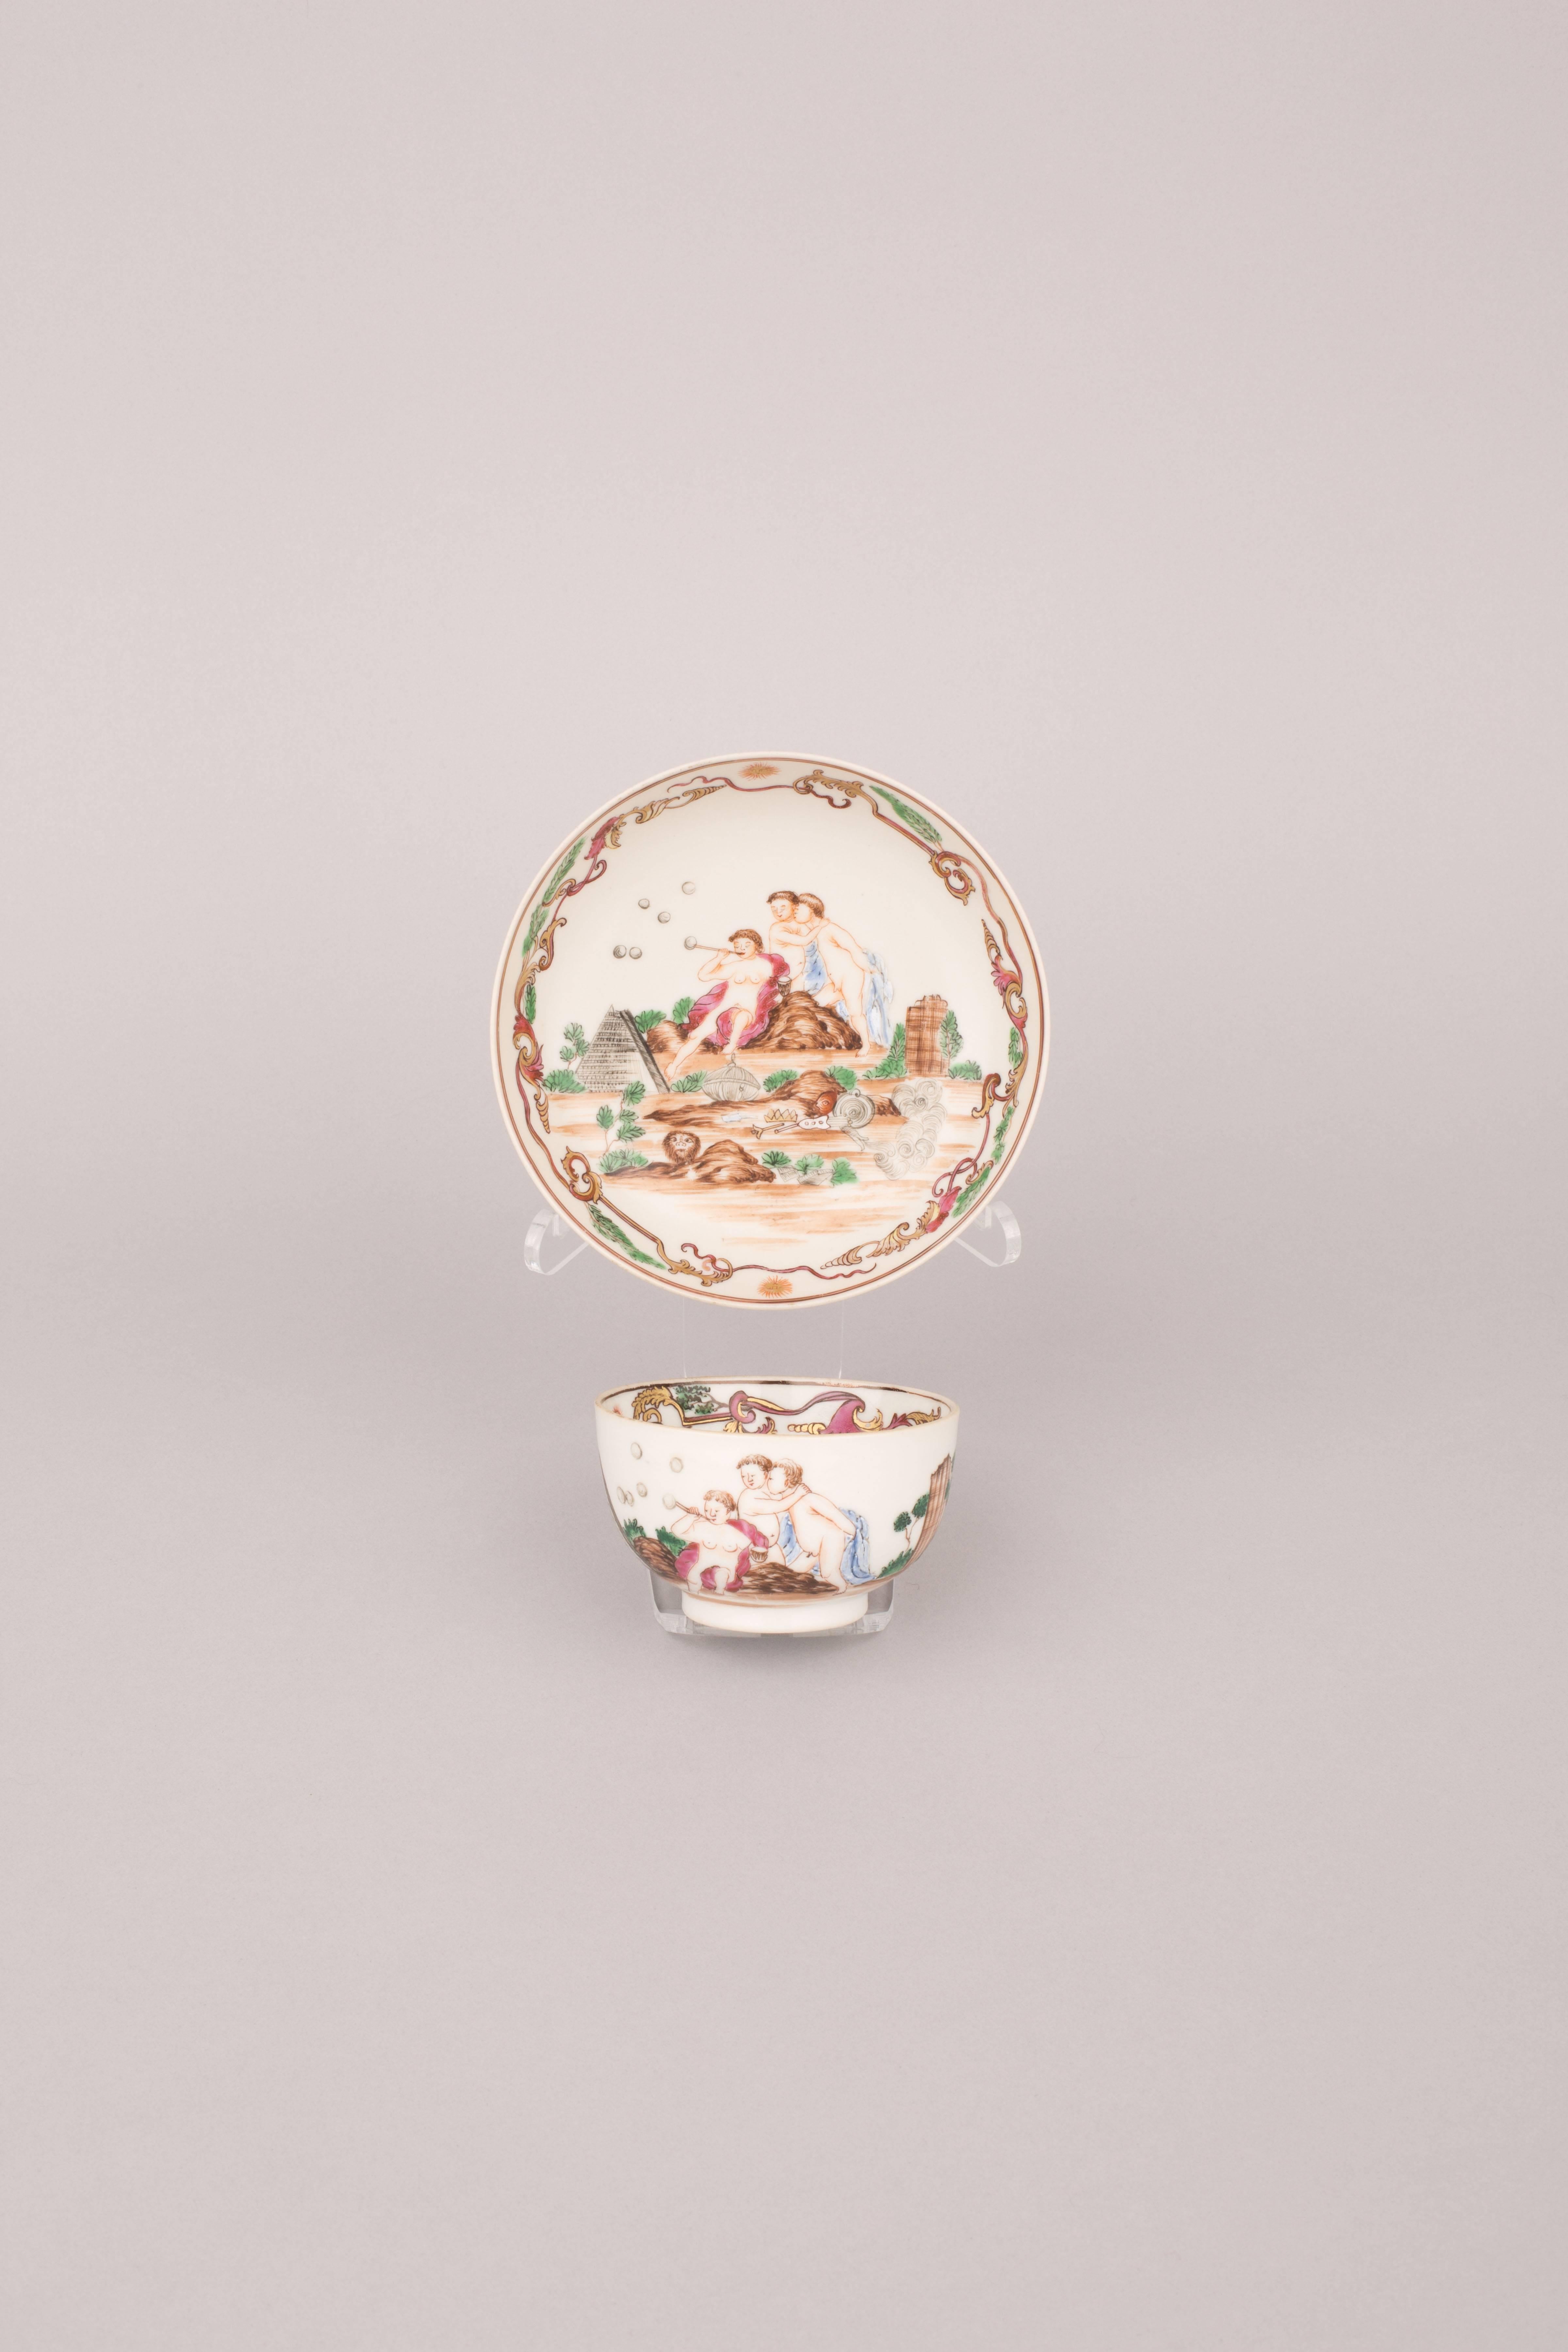 Famille rose tea bowl and saucer, painted after an unknown European engraving with three cherubs amongst rockwork, one blowing bubbles, the others embracing, beside a stone pyramid and discarded objects including a coronet, basket, palette, brush